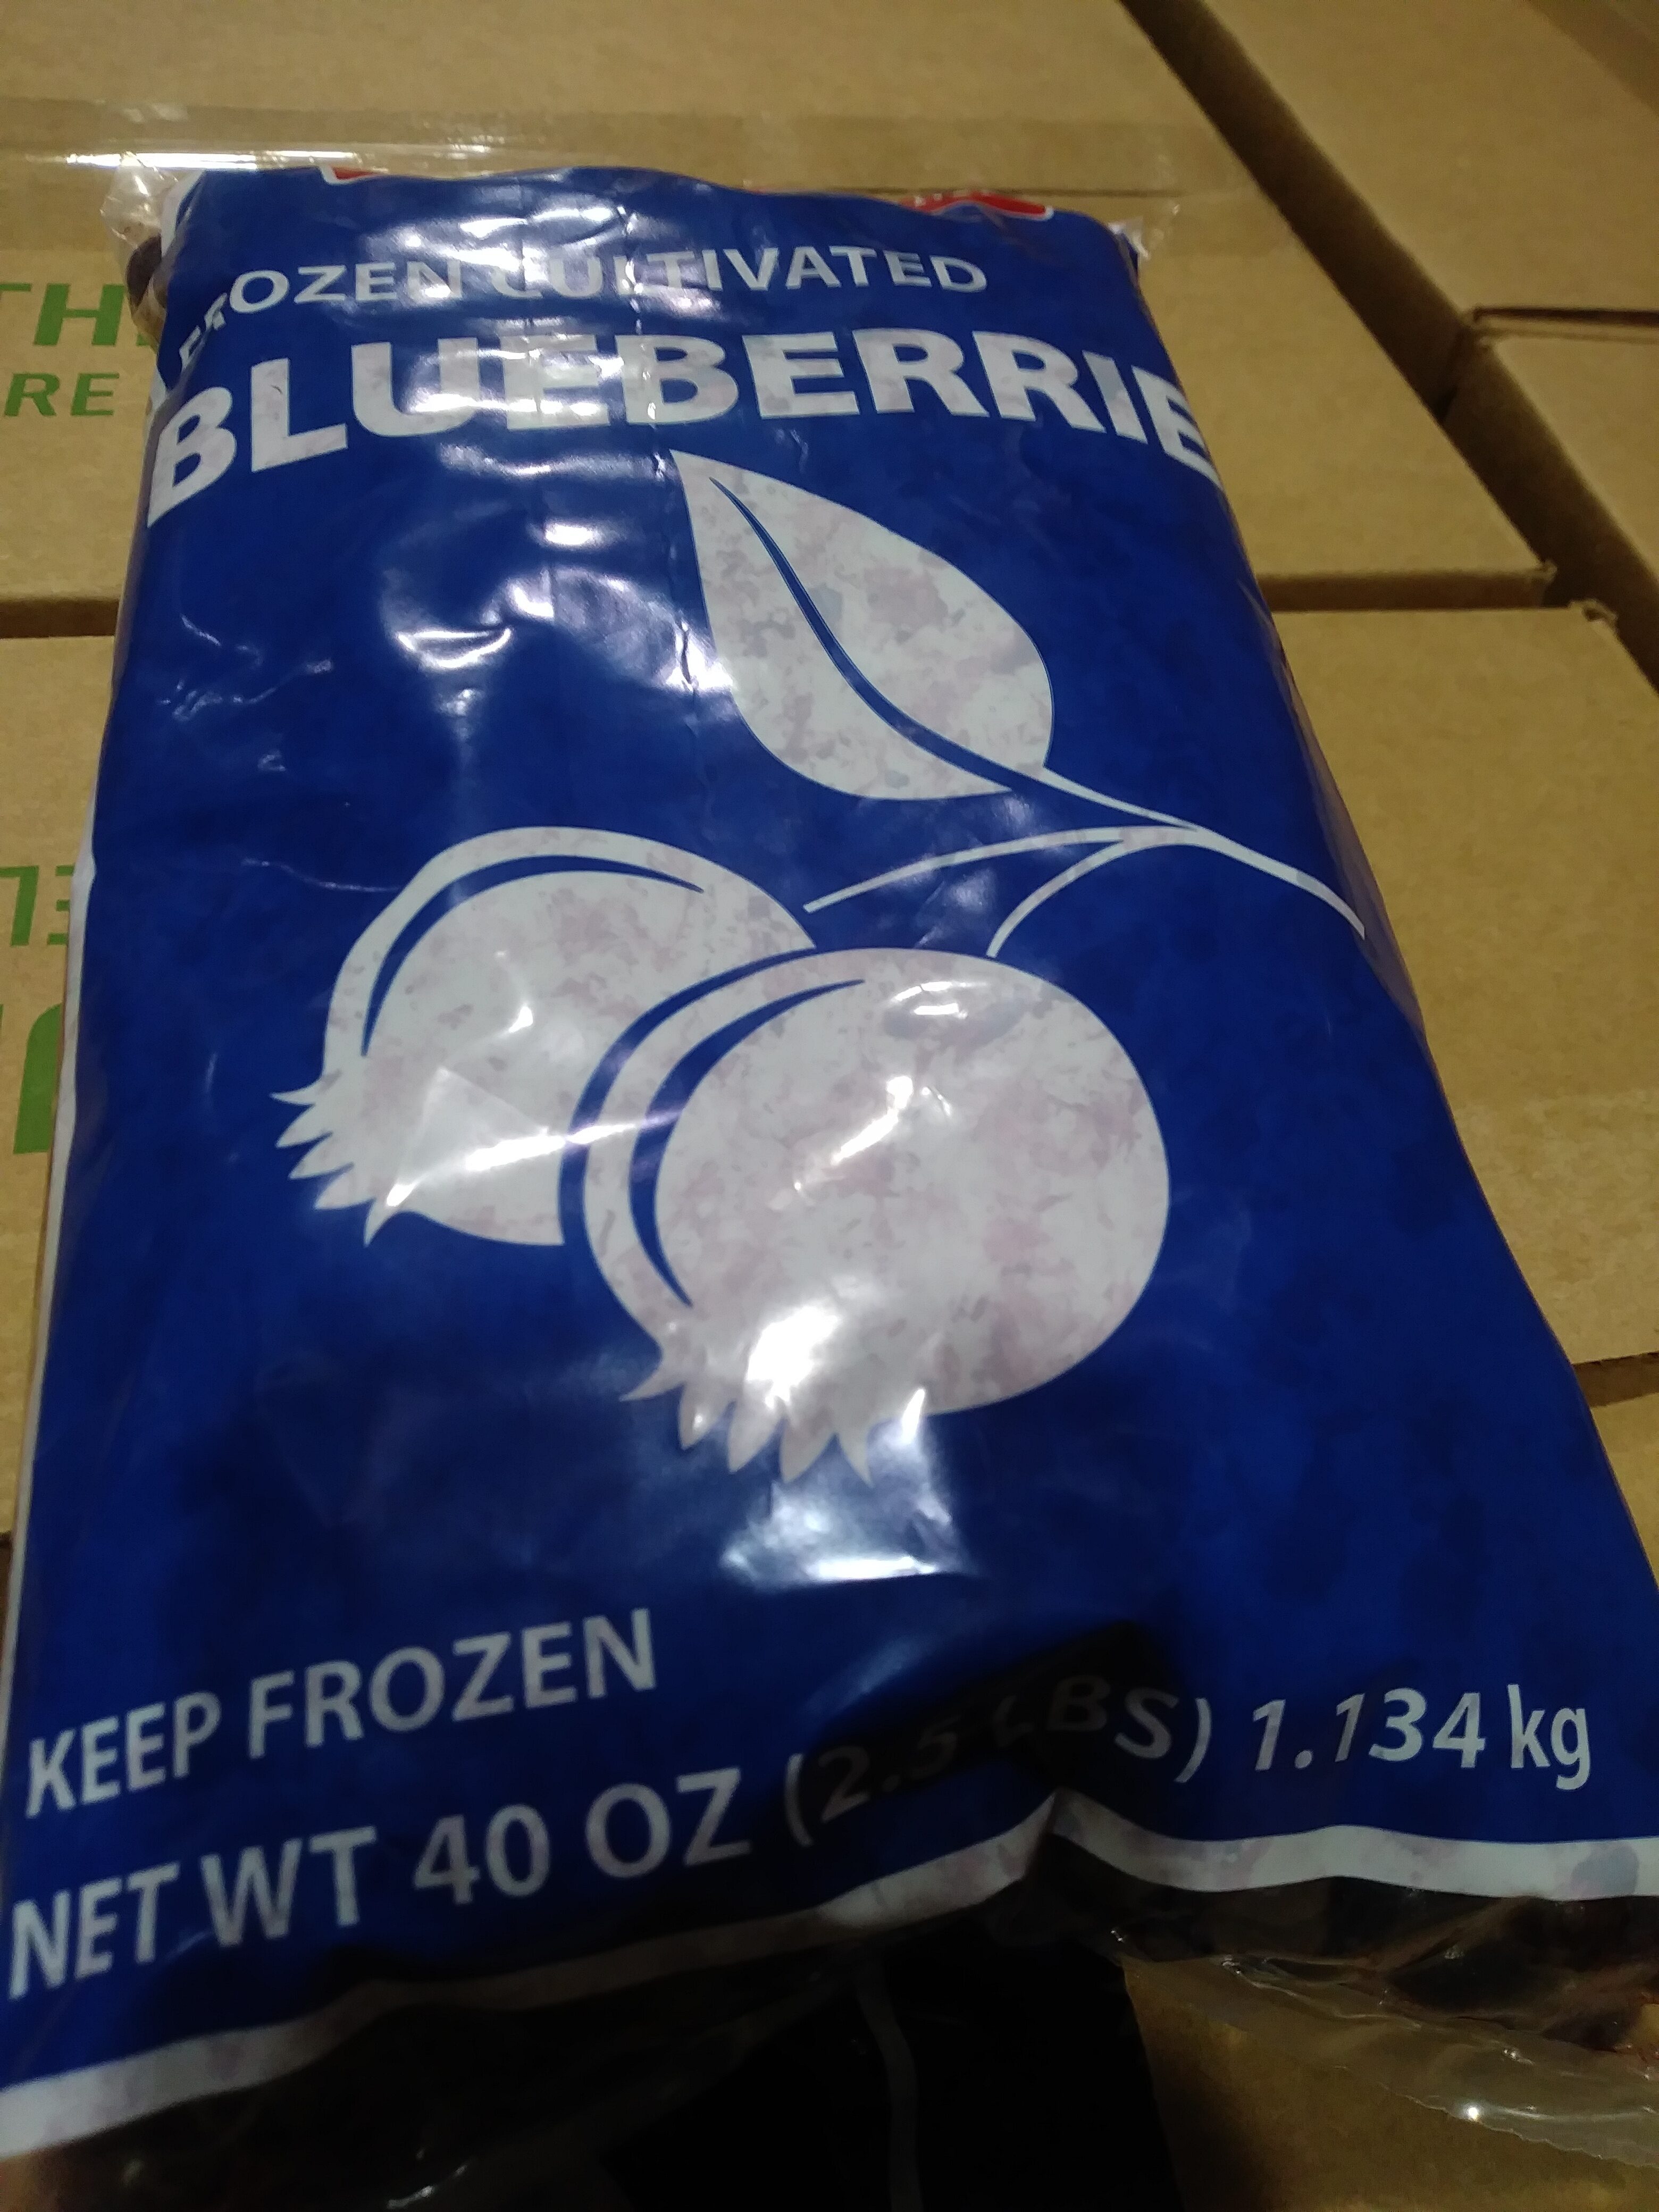 Frozen Cultivated Blueberries - Product